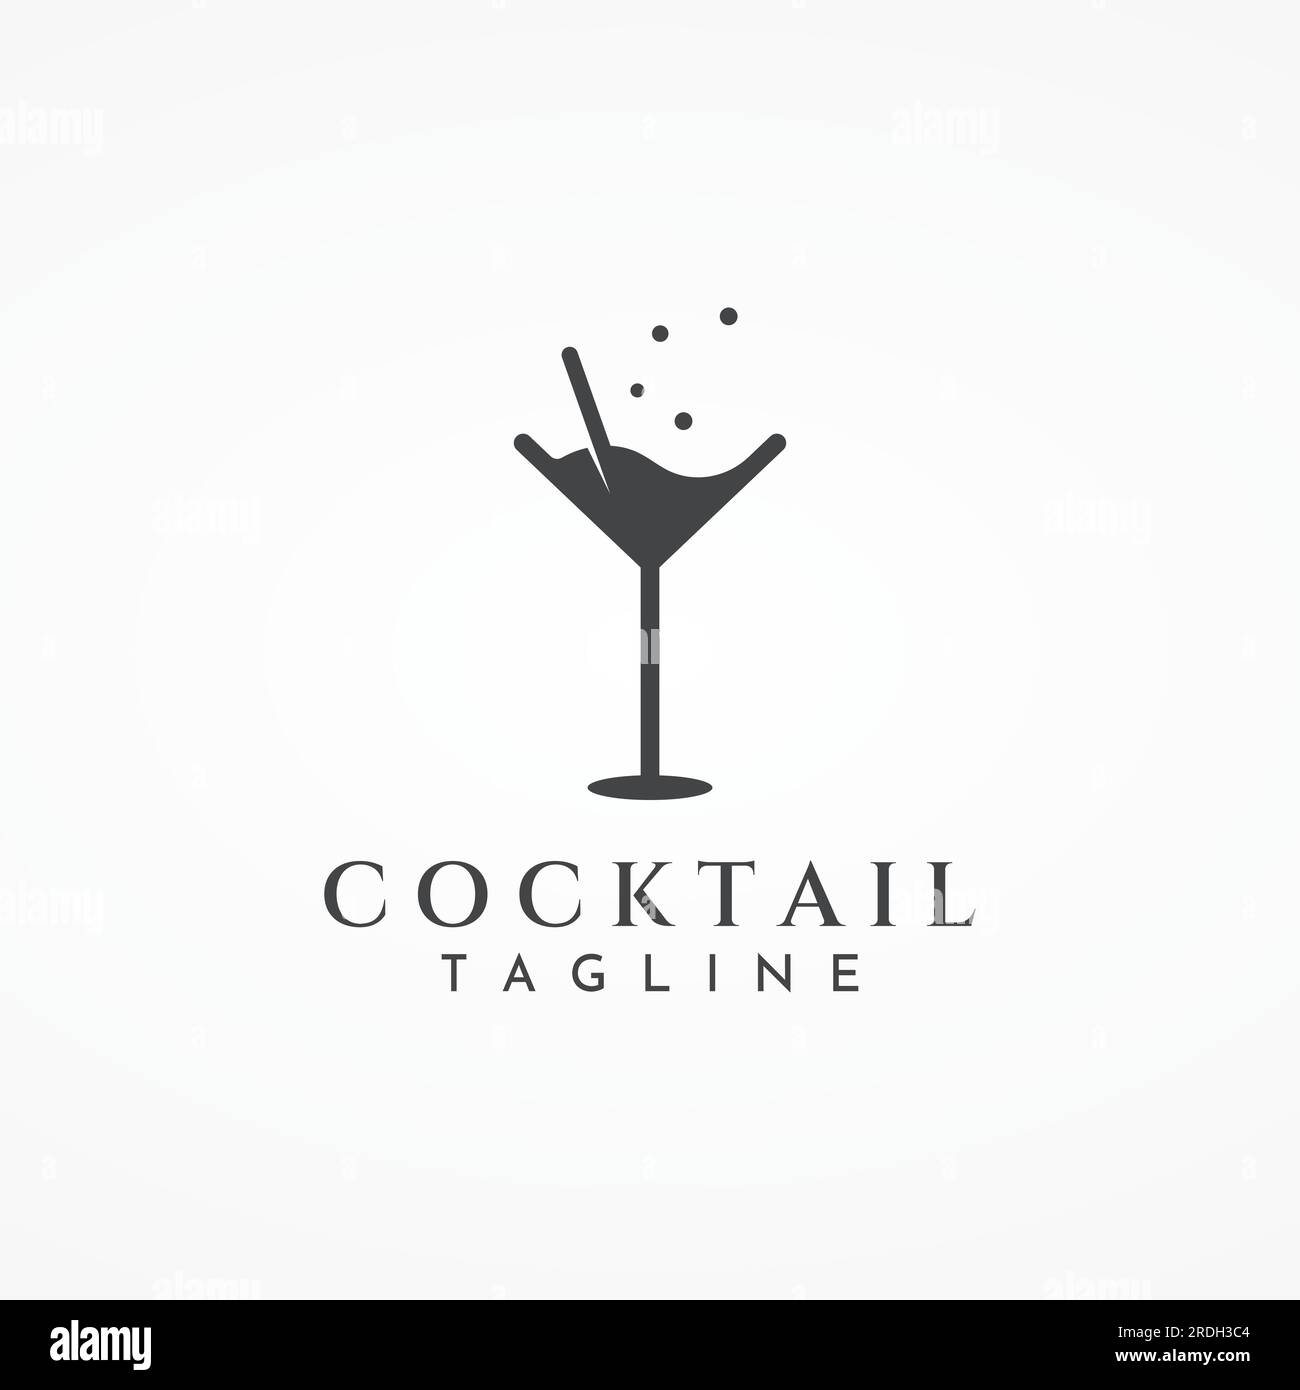 Alcohol cocktail logos, nightclub drinks.Logos for nightclubs, bars and more. Stock Vector